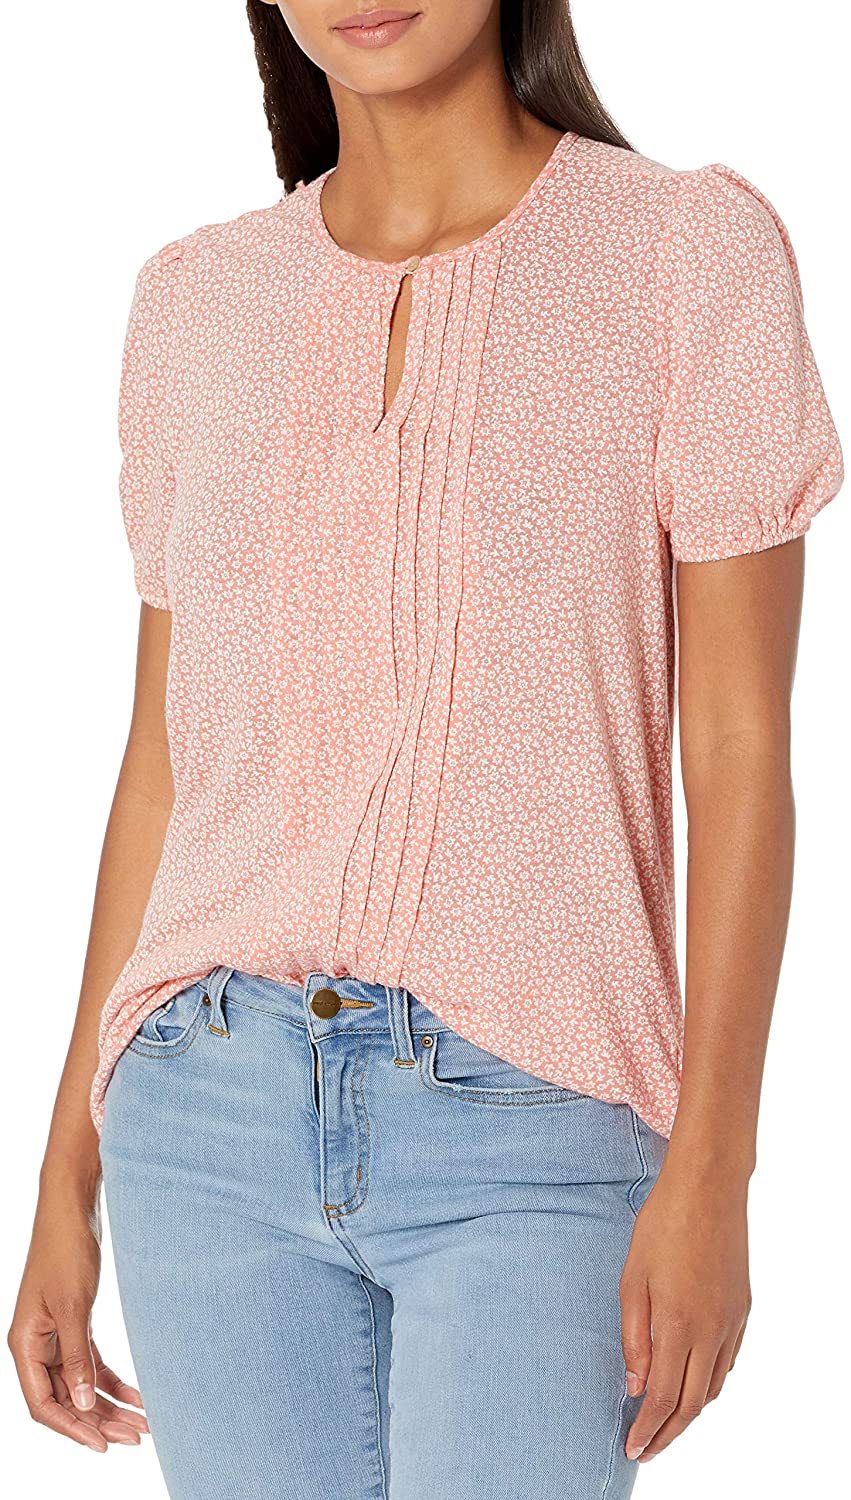 Price:$29.70 Lucky Brand Women's Short Sleeve V Neck Pintuck Printed Top at Amazon Women’s Clothing store